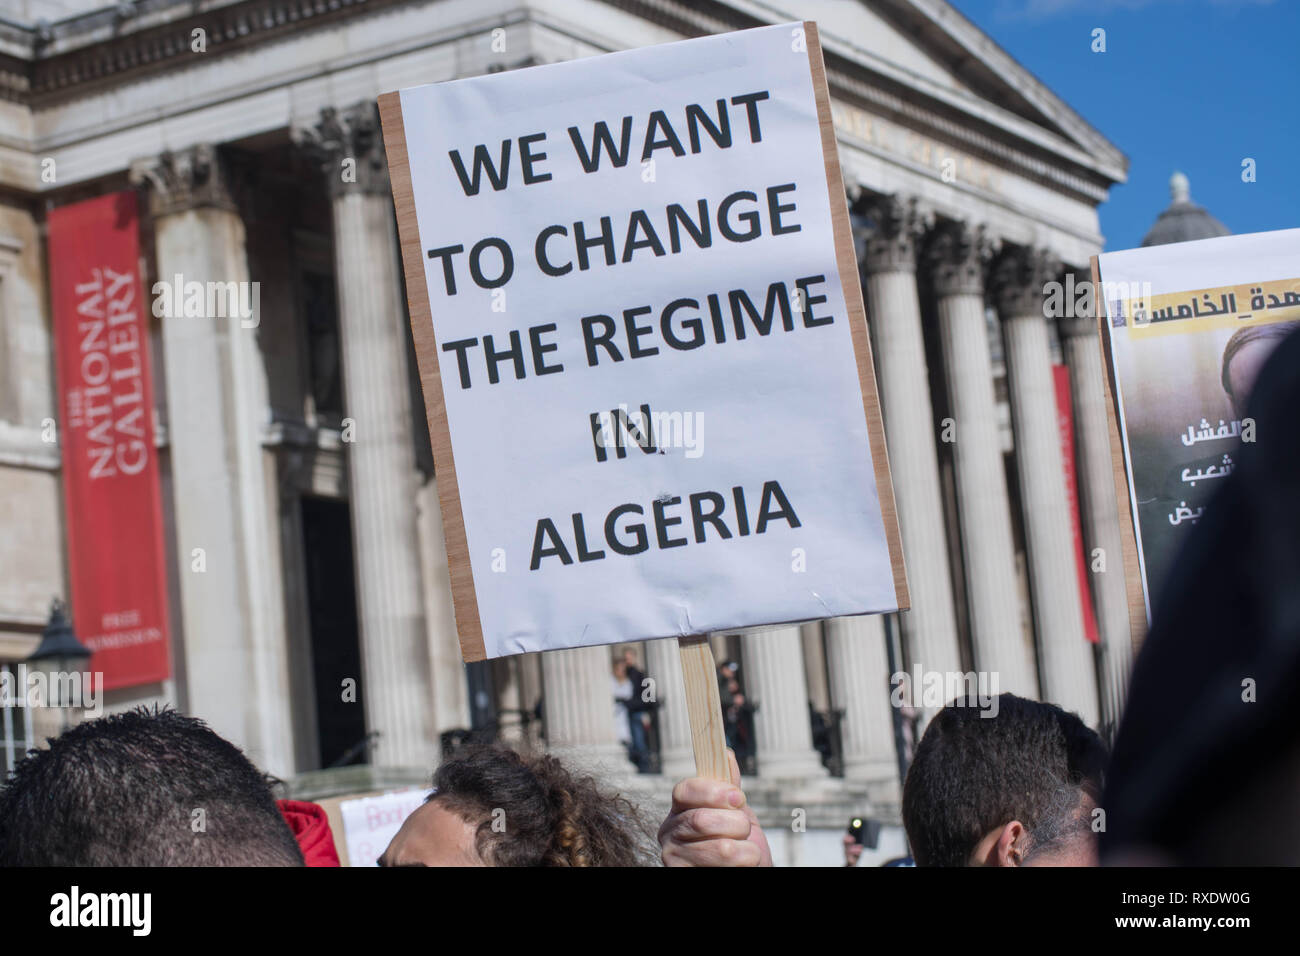 London, UK. 09th March, 2019. Saturday the 9th of march, 1pm Trafalgar square .london UK Algiers, has had its biggest street demonstrations in over a decade in recent days as crowds protested against Abdelaziz Bouteflika seeking a fifth term as president after 20 years in power. today london based Algerian community also stood in solidarity with protesters at home as the regime has blanked all media coverage in Algeria, and police authority have acted with violence against gathered demonstrators, Credit: Philip Robins/Alamy Live News Stock Photo